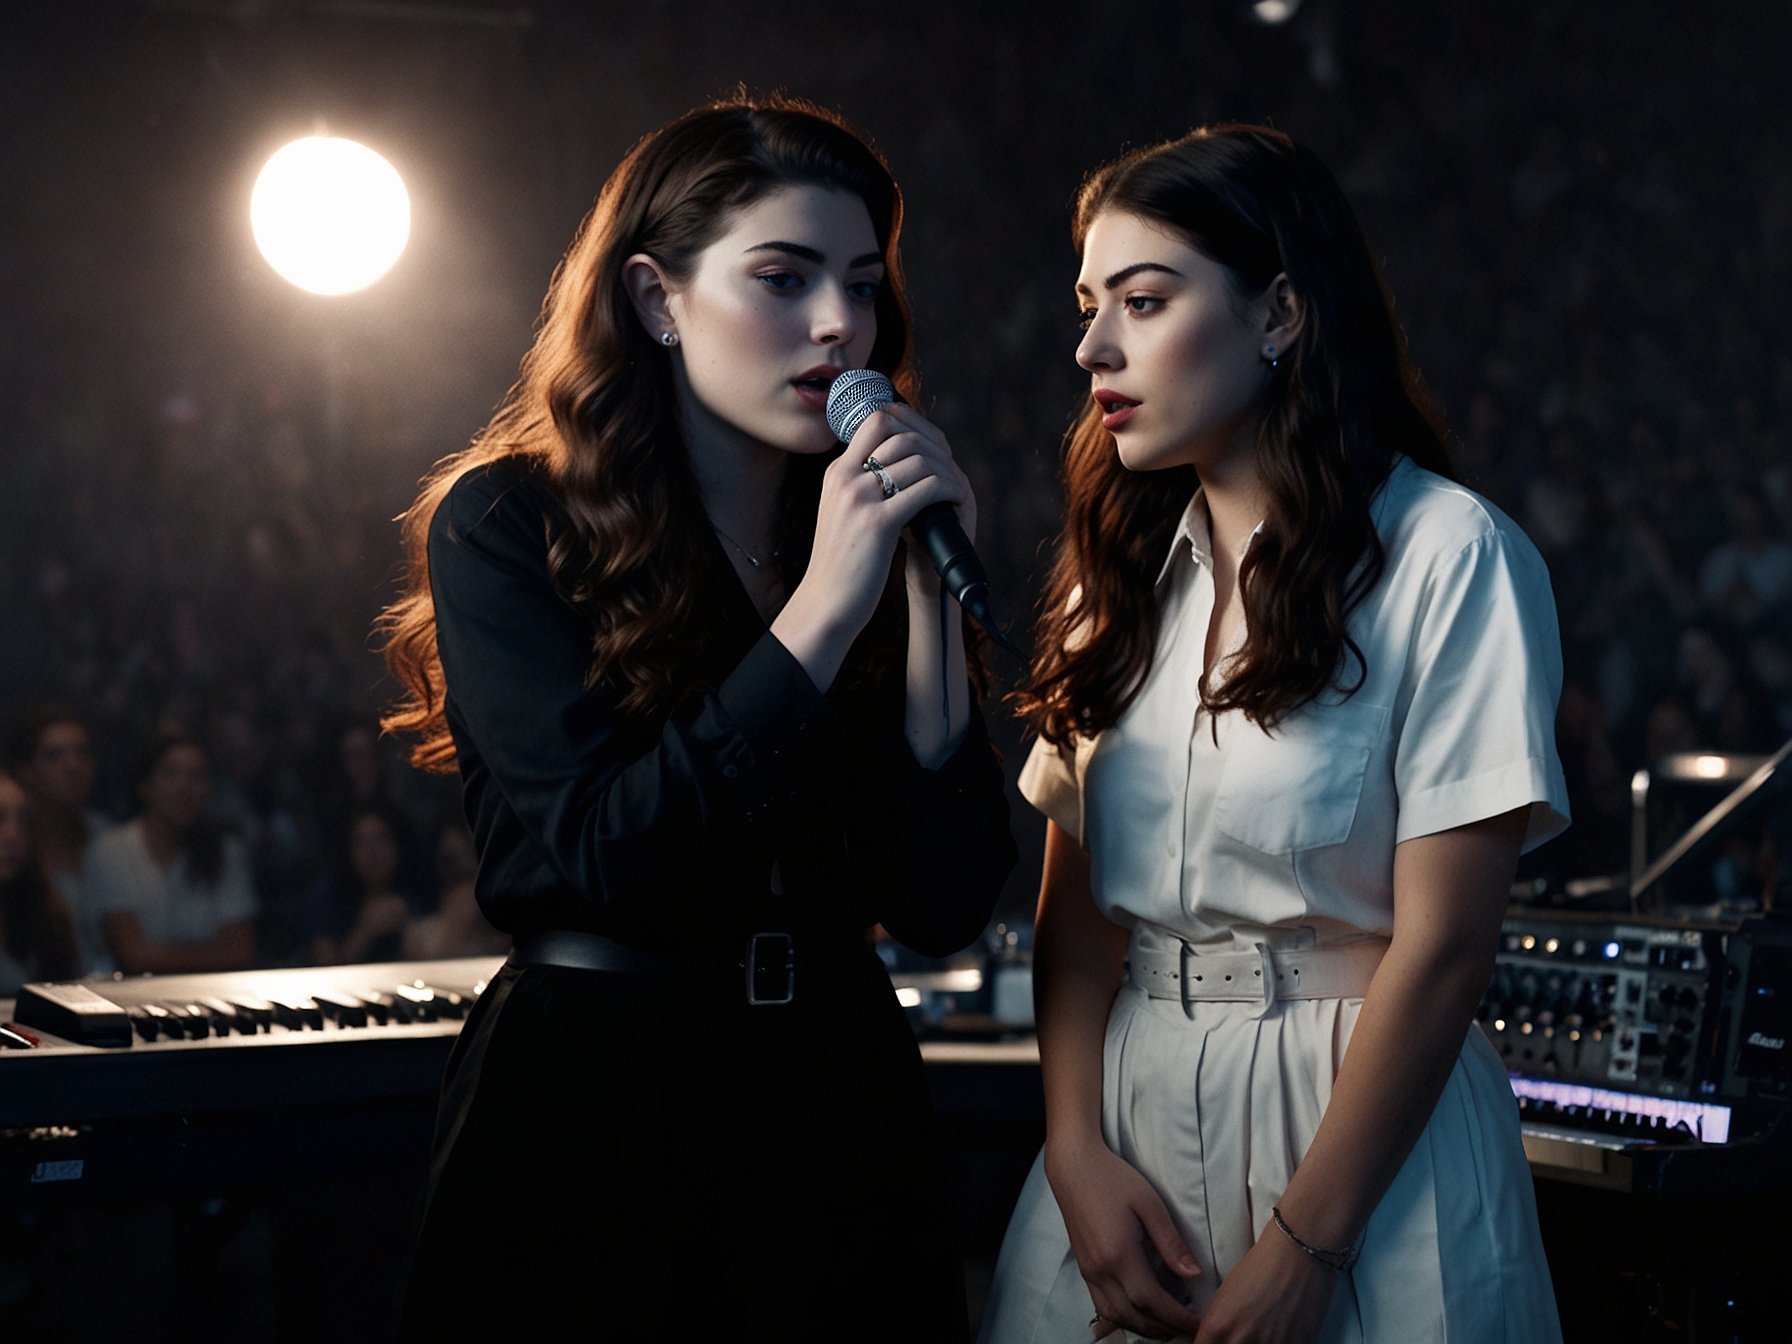 Lorde and Charli XCX performing together in a dimly lit studio, capturing the emotional intensity of their collaboration on the 'Girl, So Confusing' remix.